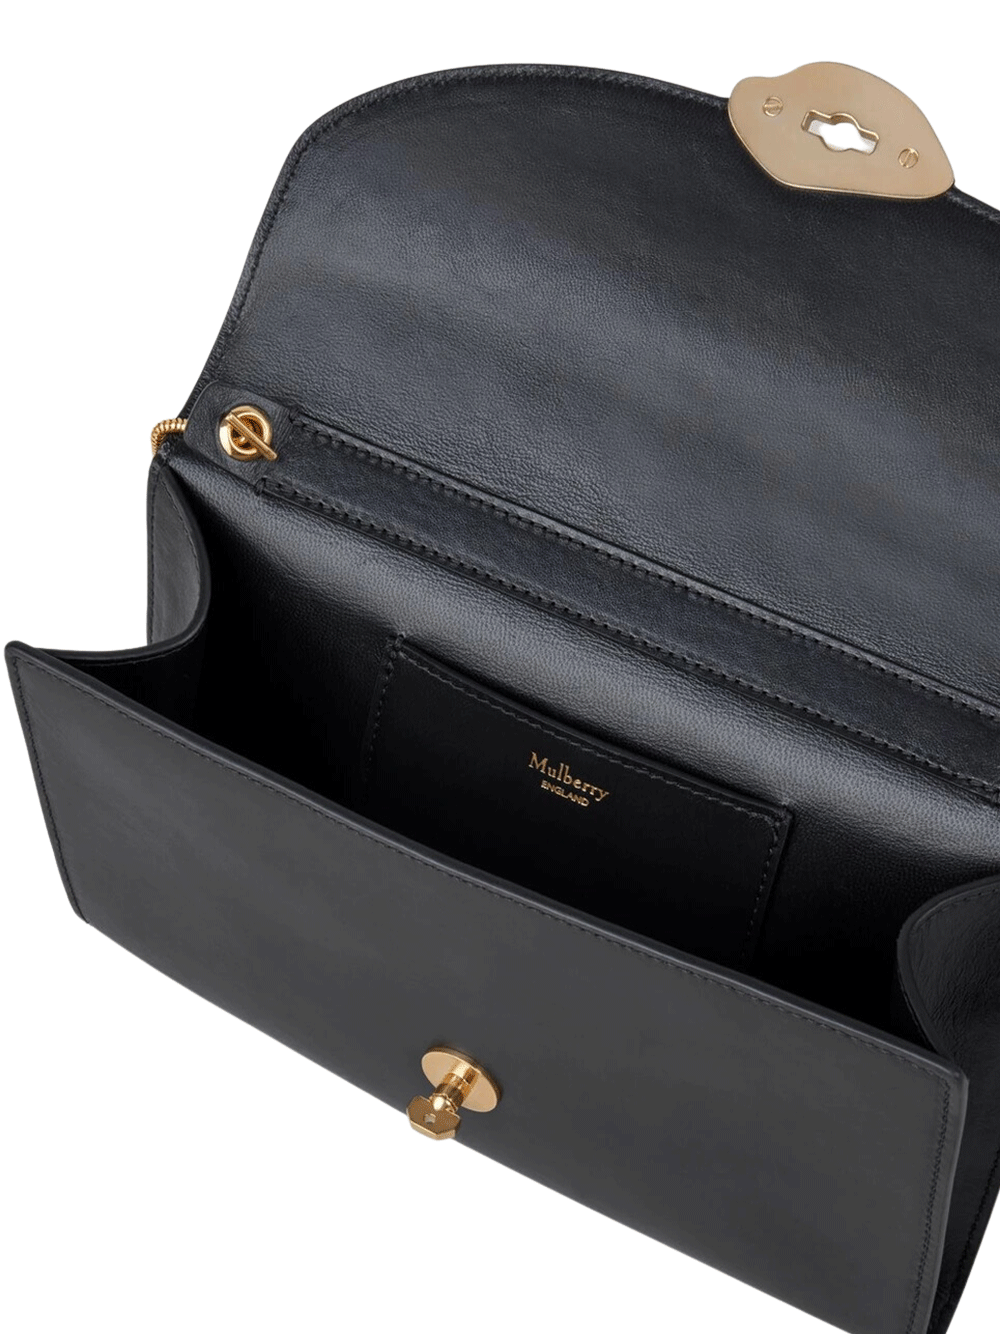 Mulberry-Lana-Clutch-High-Gloss-Leather-Black-4